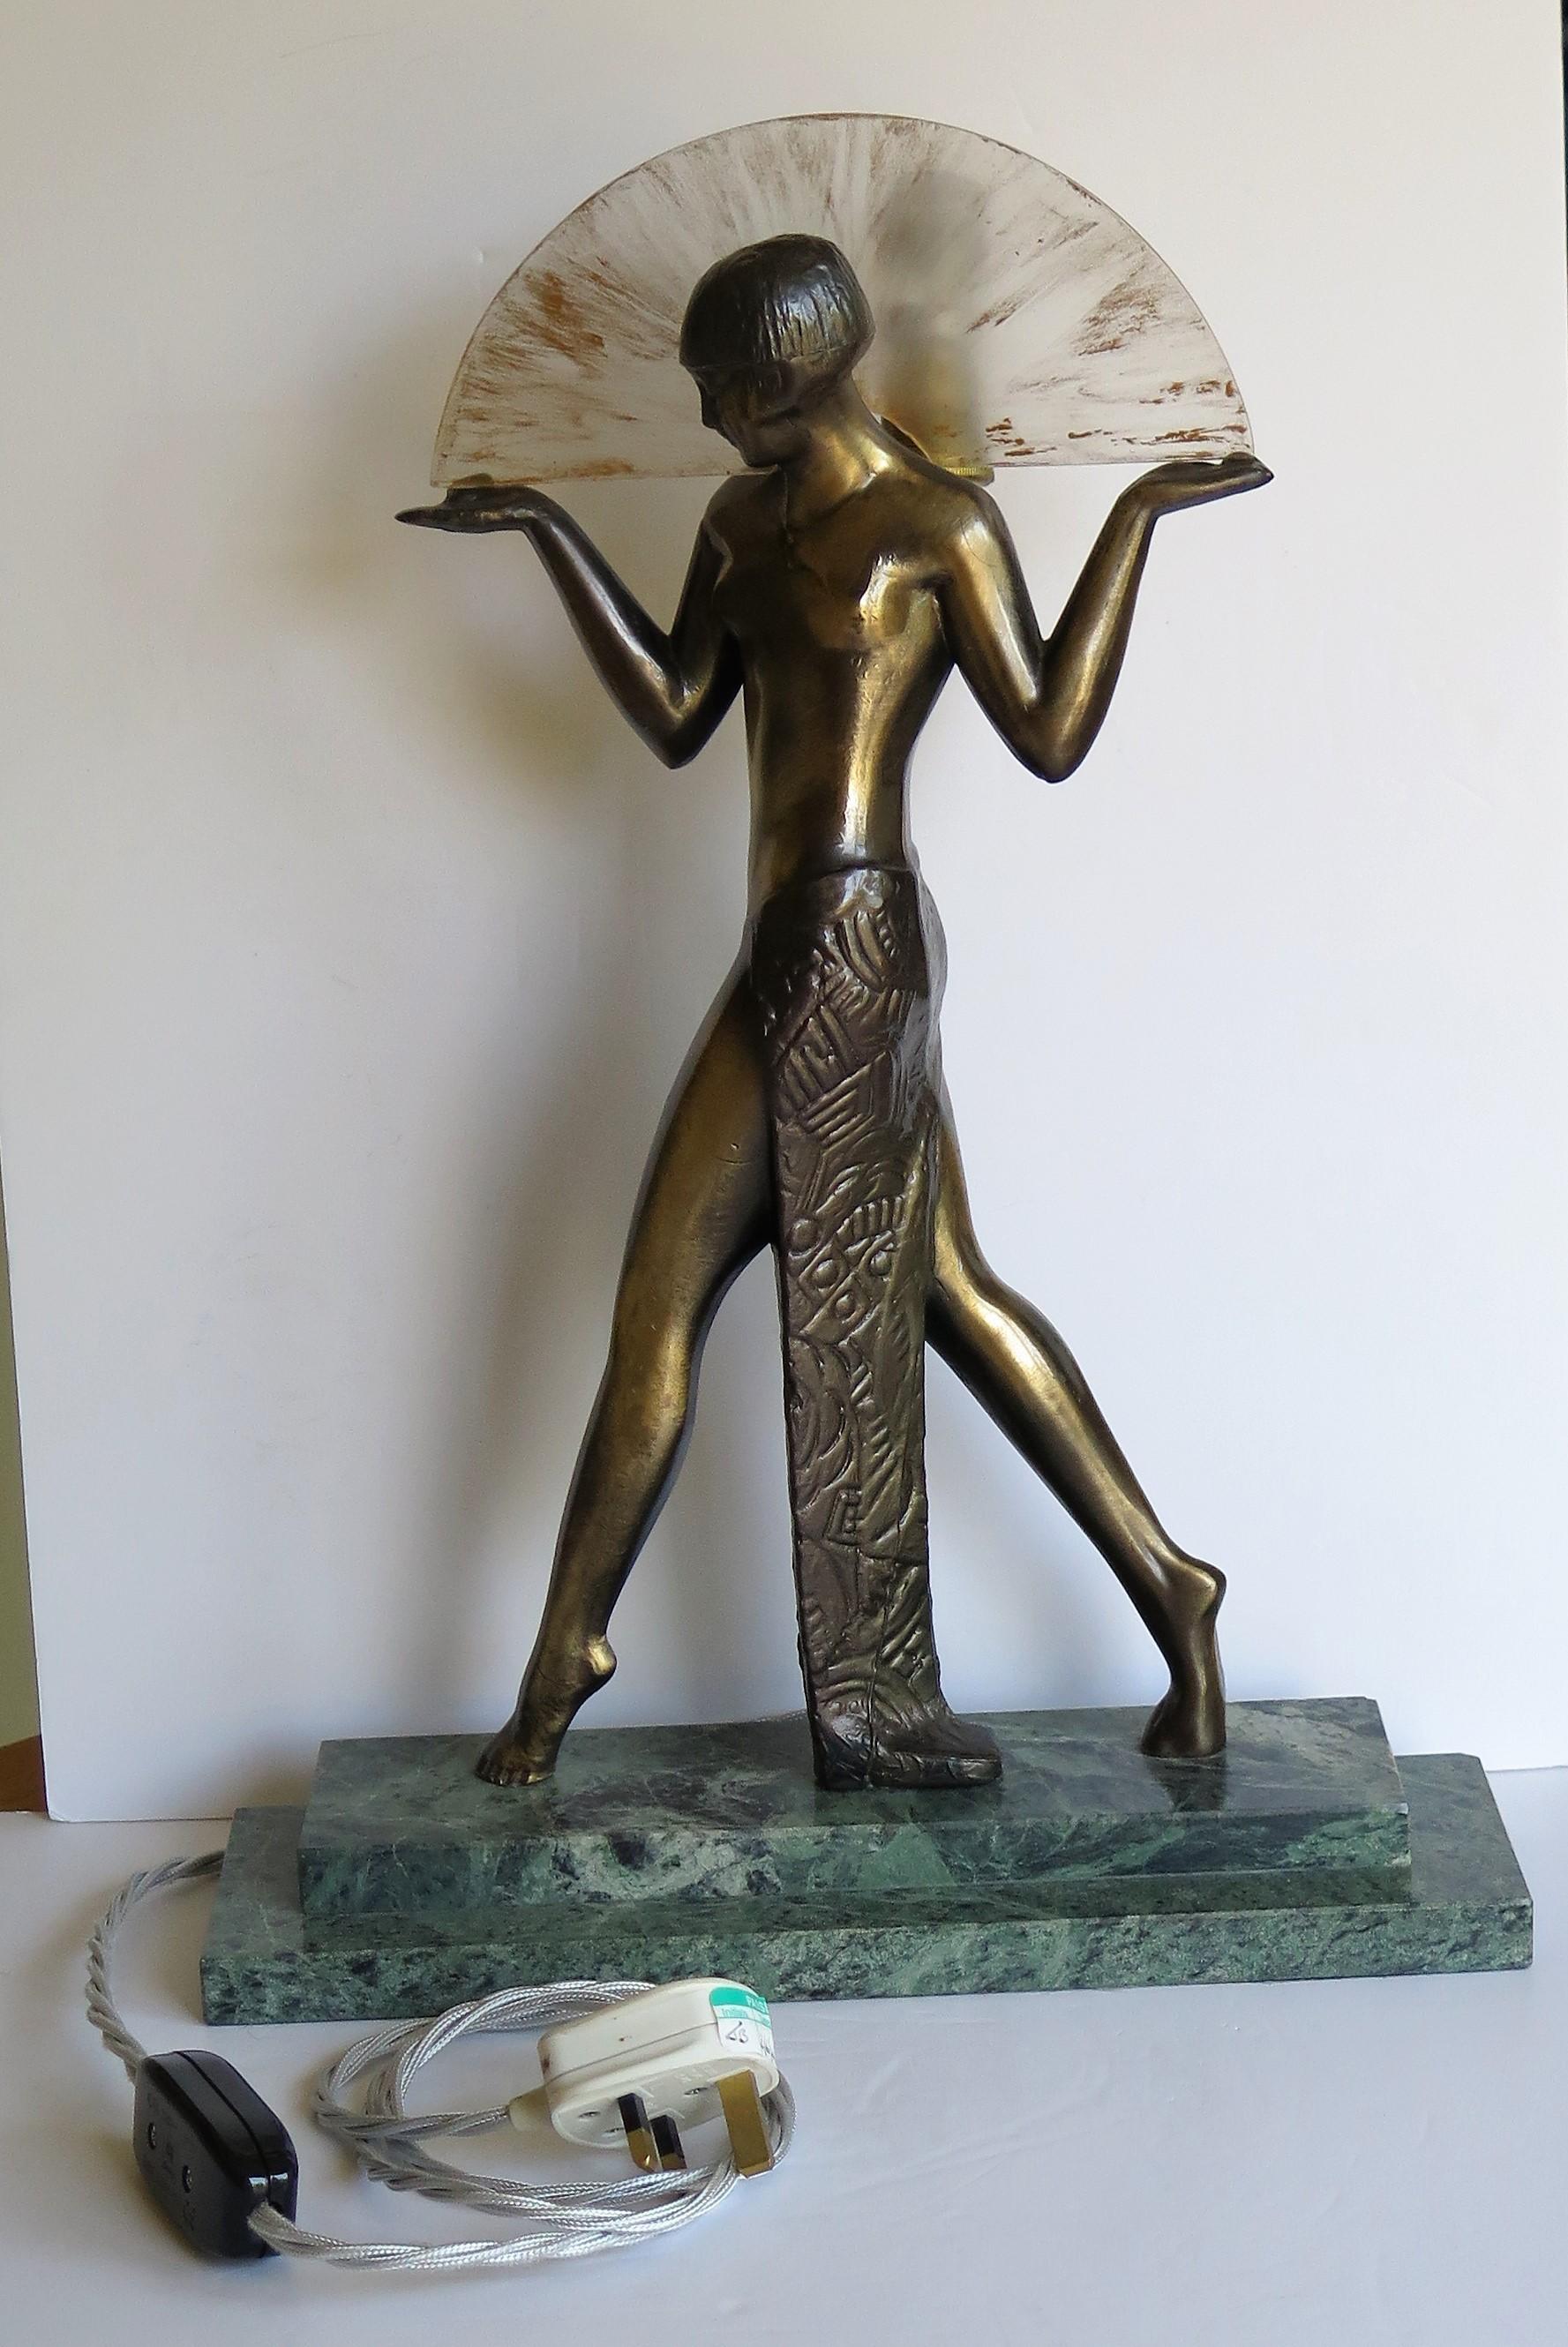 English Art Deco Style Fan Dancer Figurine Lamp after Max Le Verrier, Mid-20th Century